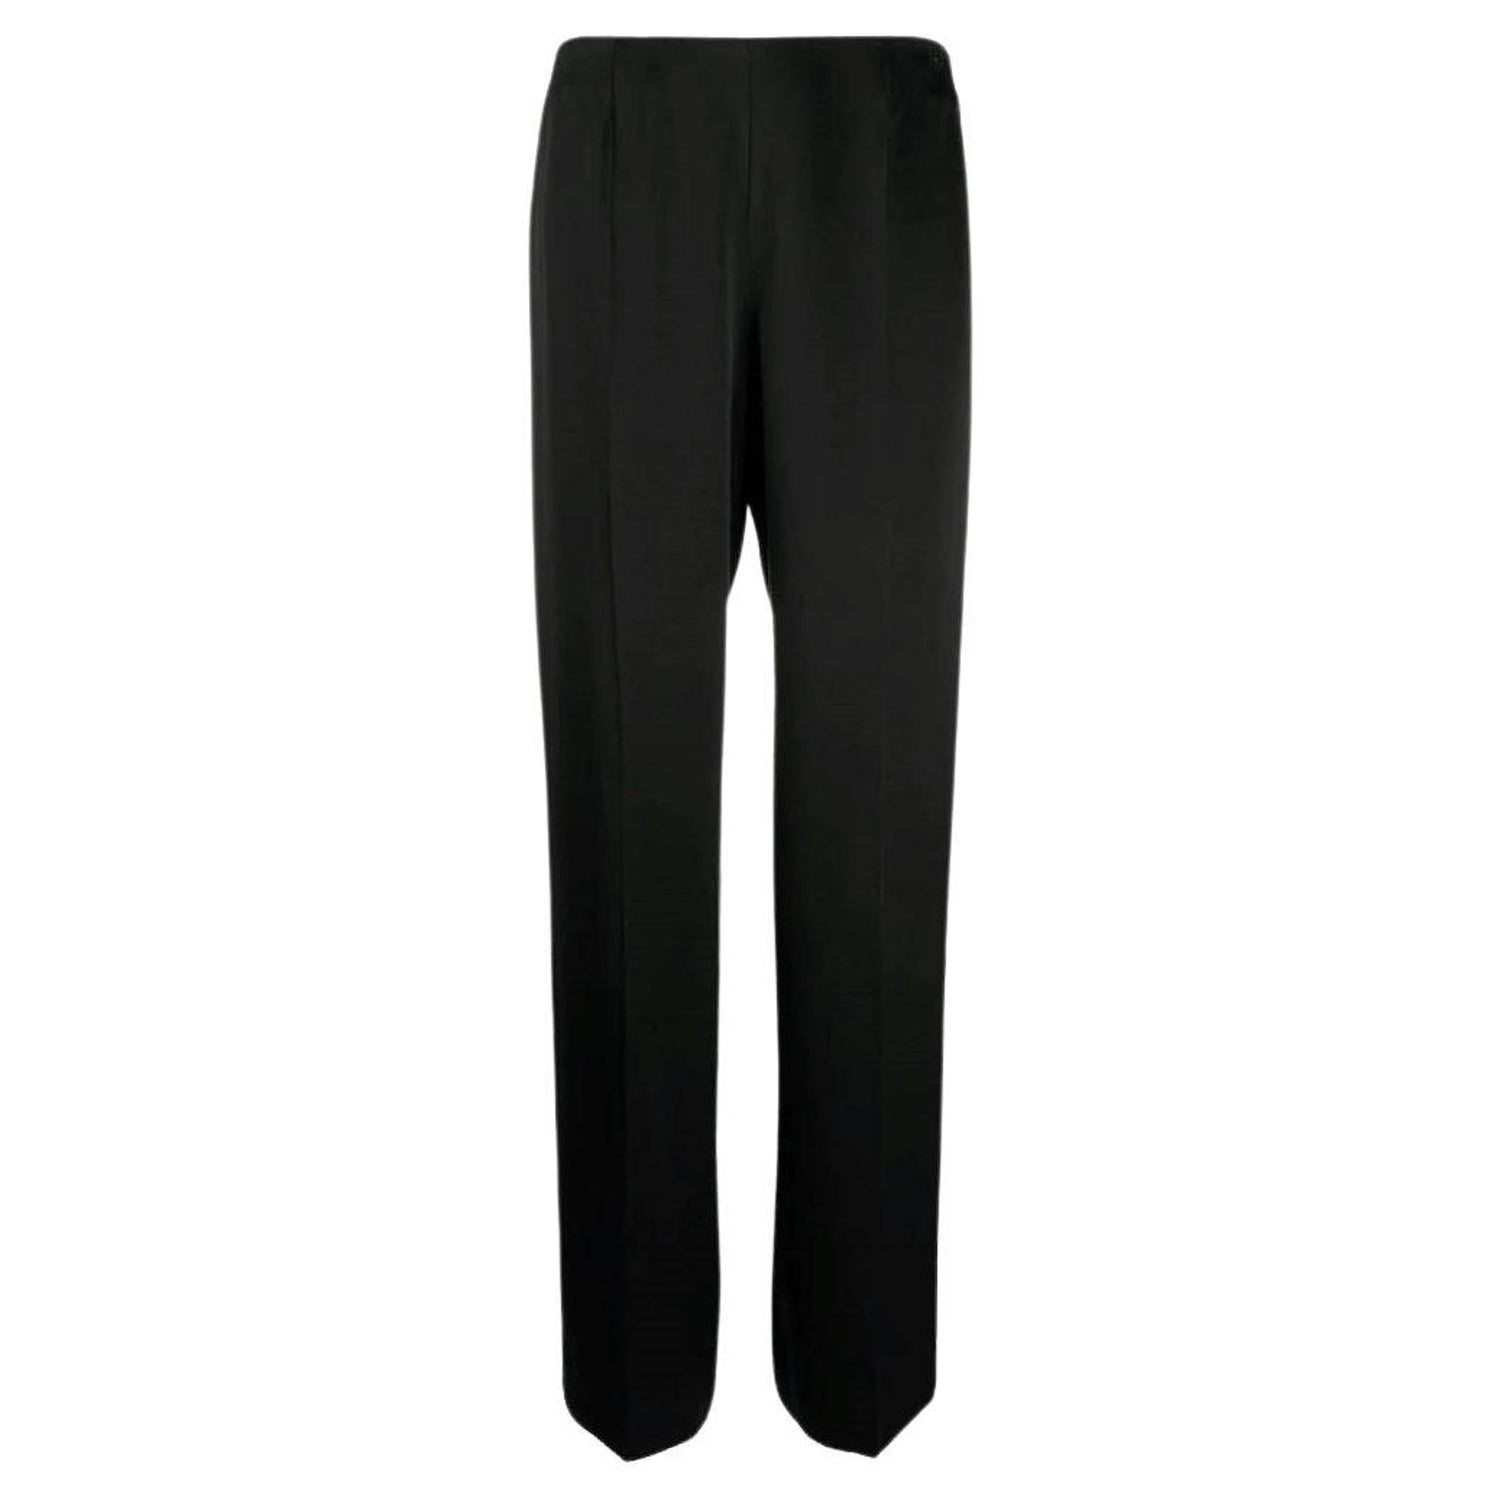 CHANEL, Pants & Jumpsuits, Chanel Vintage 9s Black Trousers Spring 996 Black  Pants With Cc Buttons